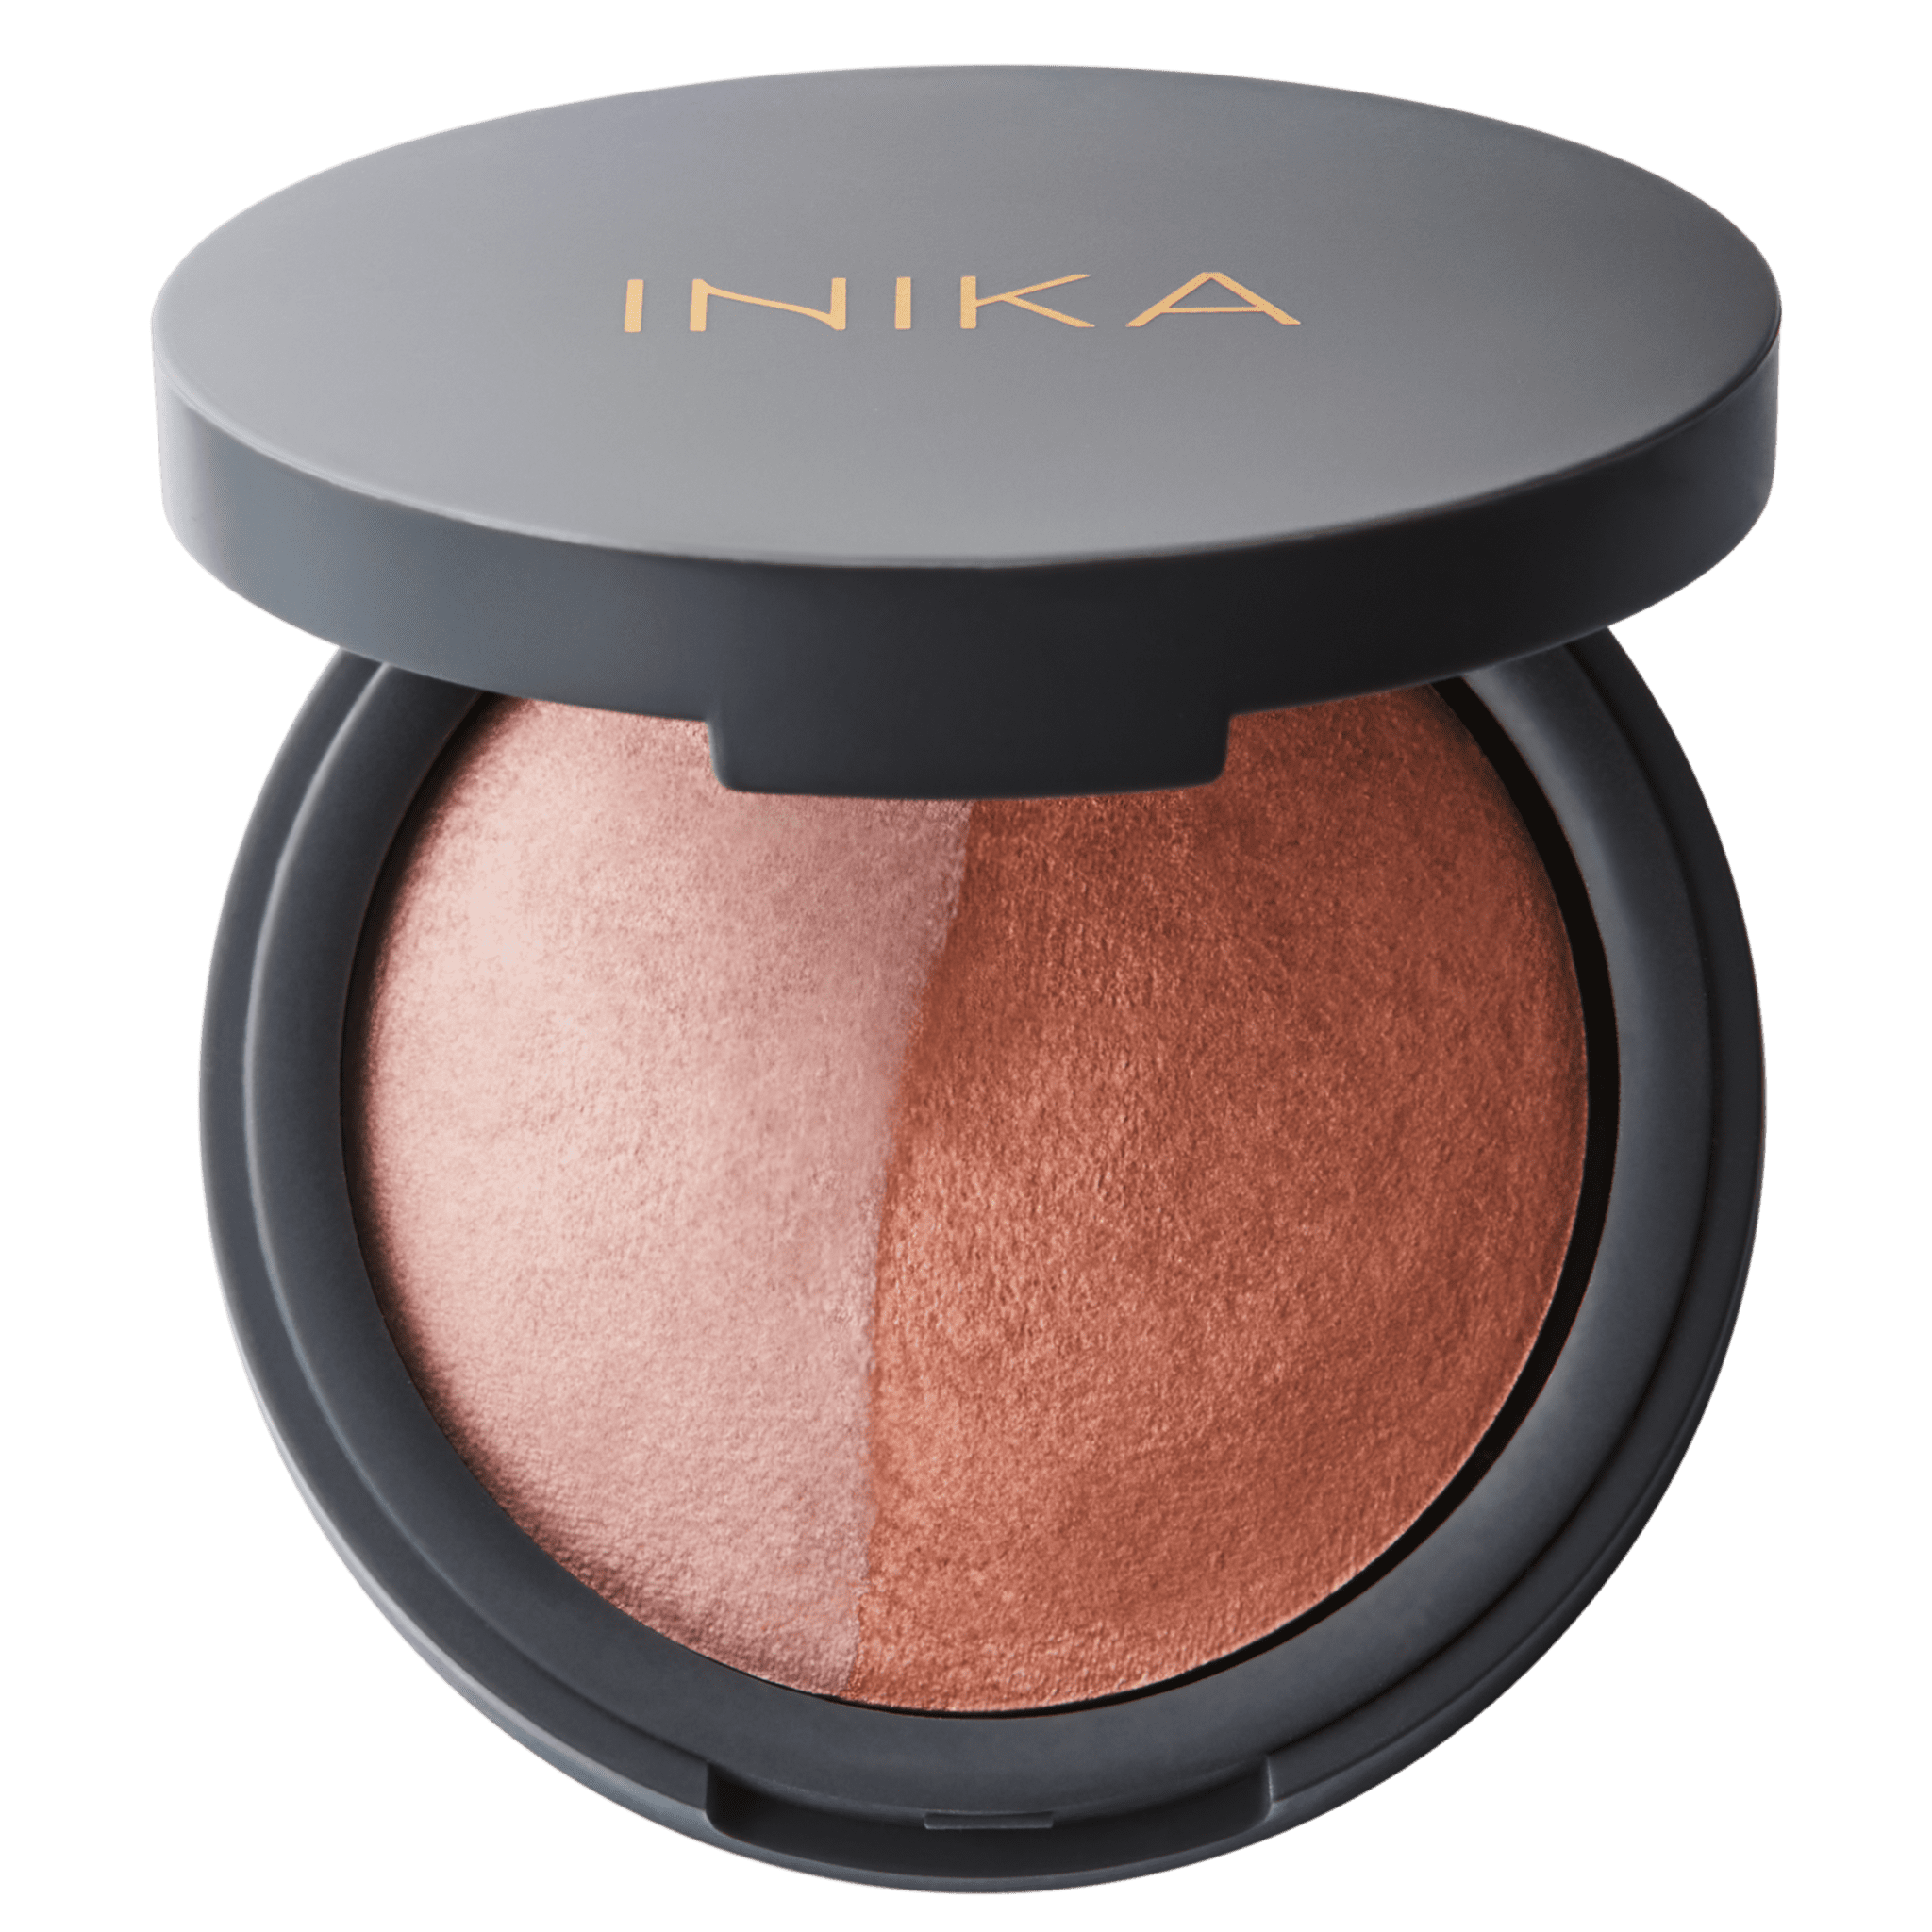 Inika Organic Baked Mineral Blush Duo Pink Tickle